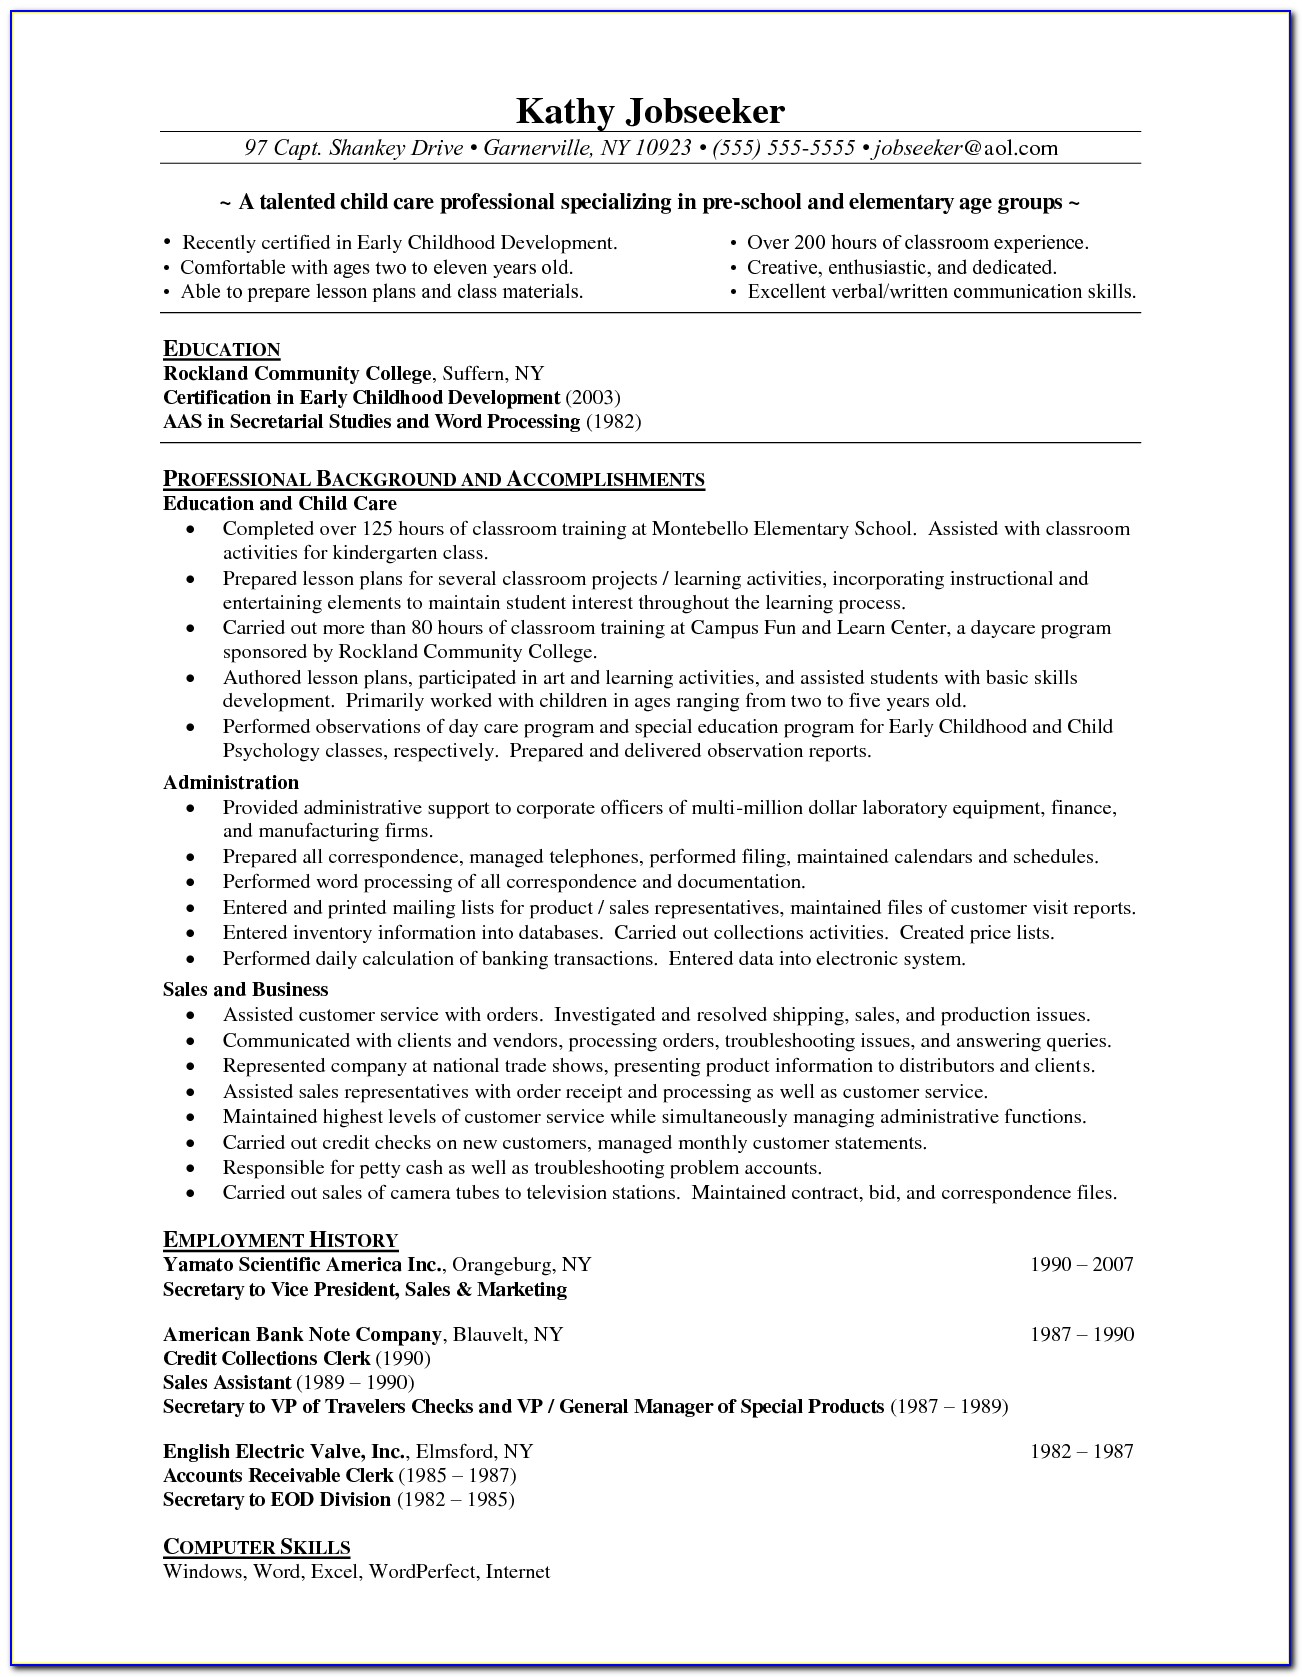 Resume For Teachers Without Experience In The Philippines